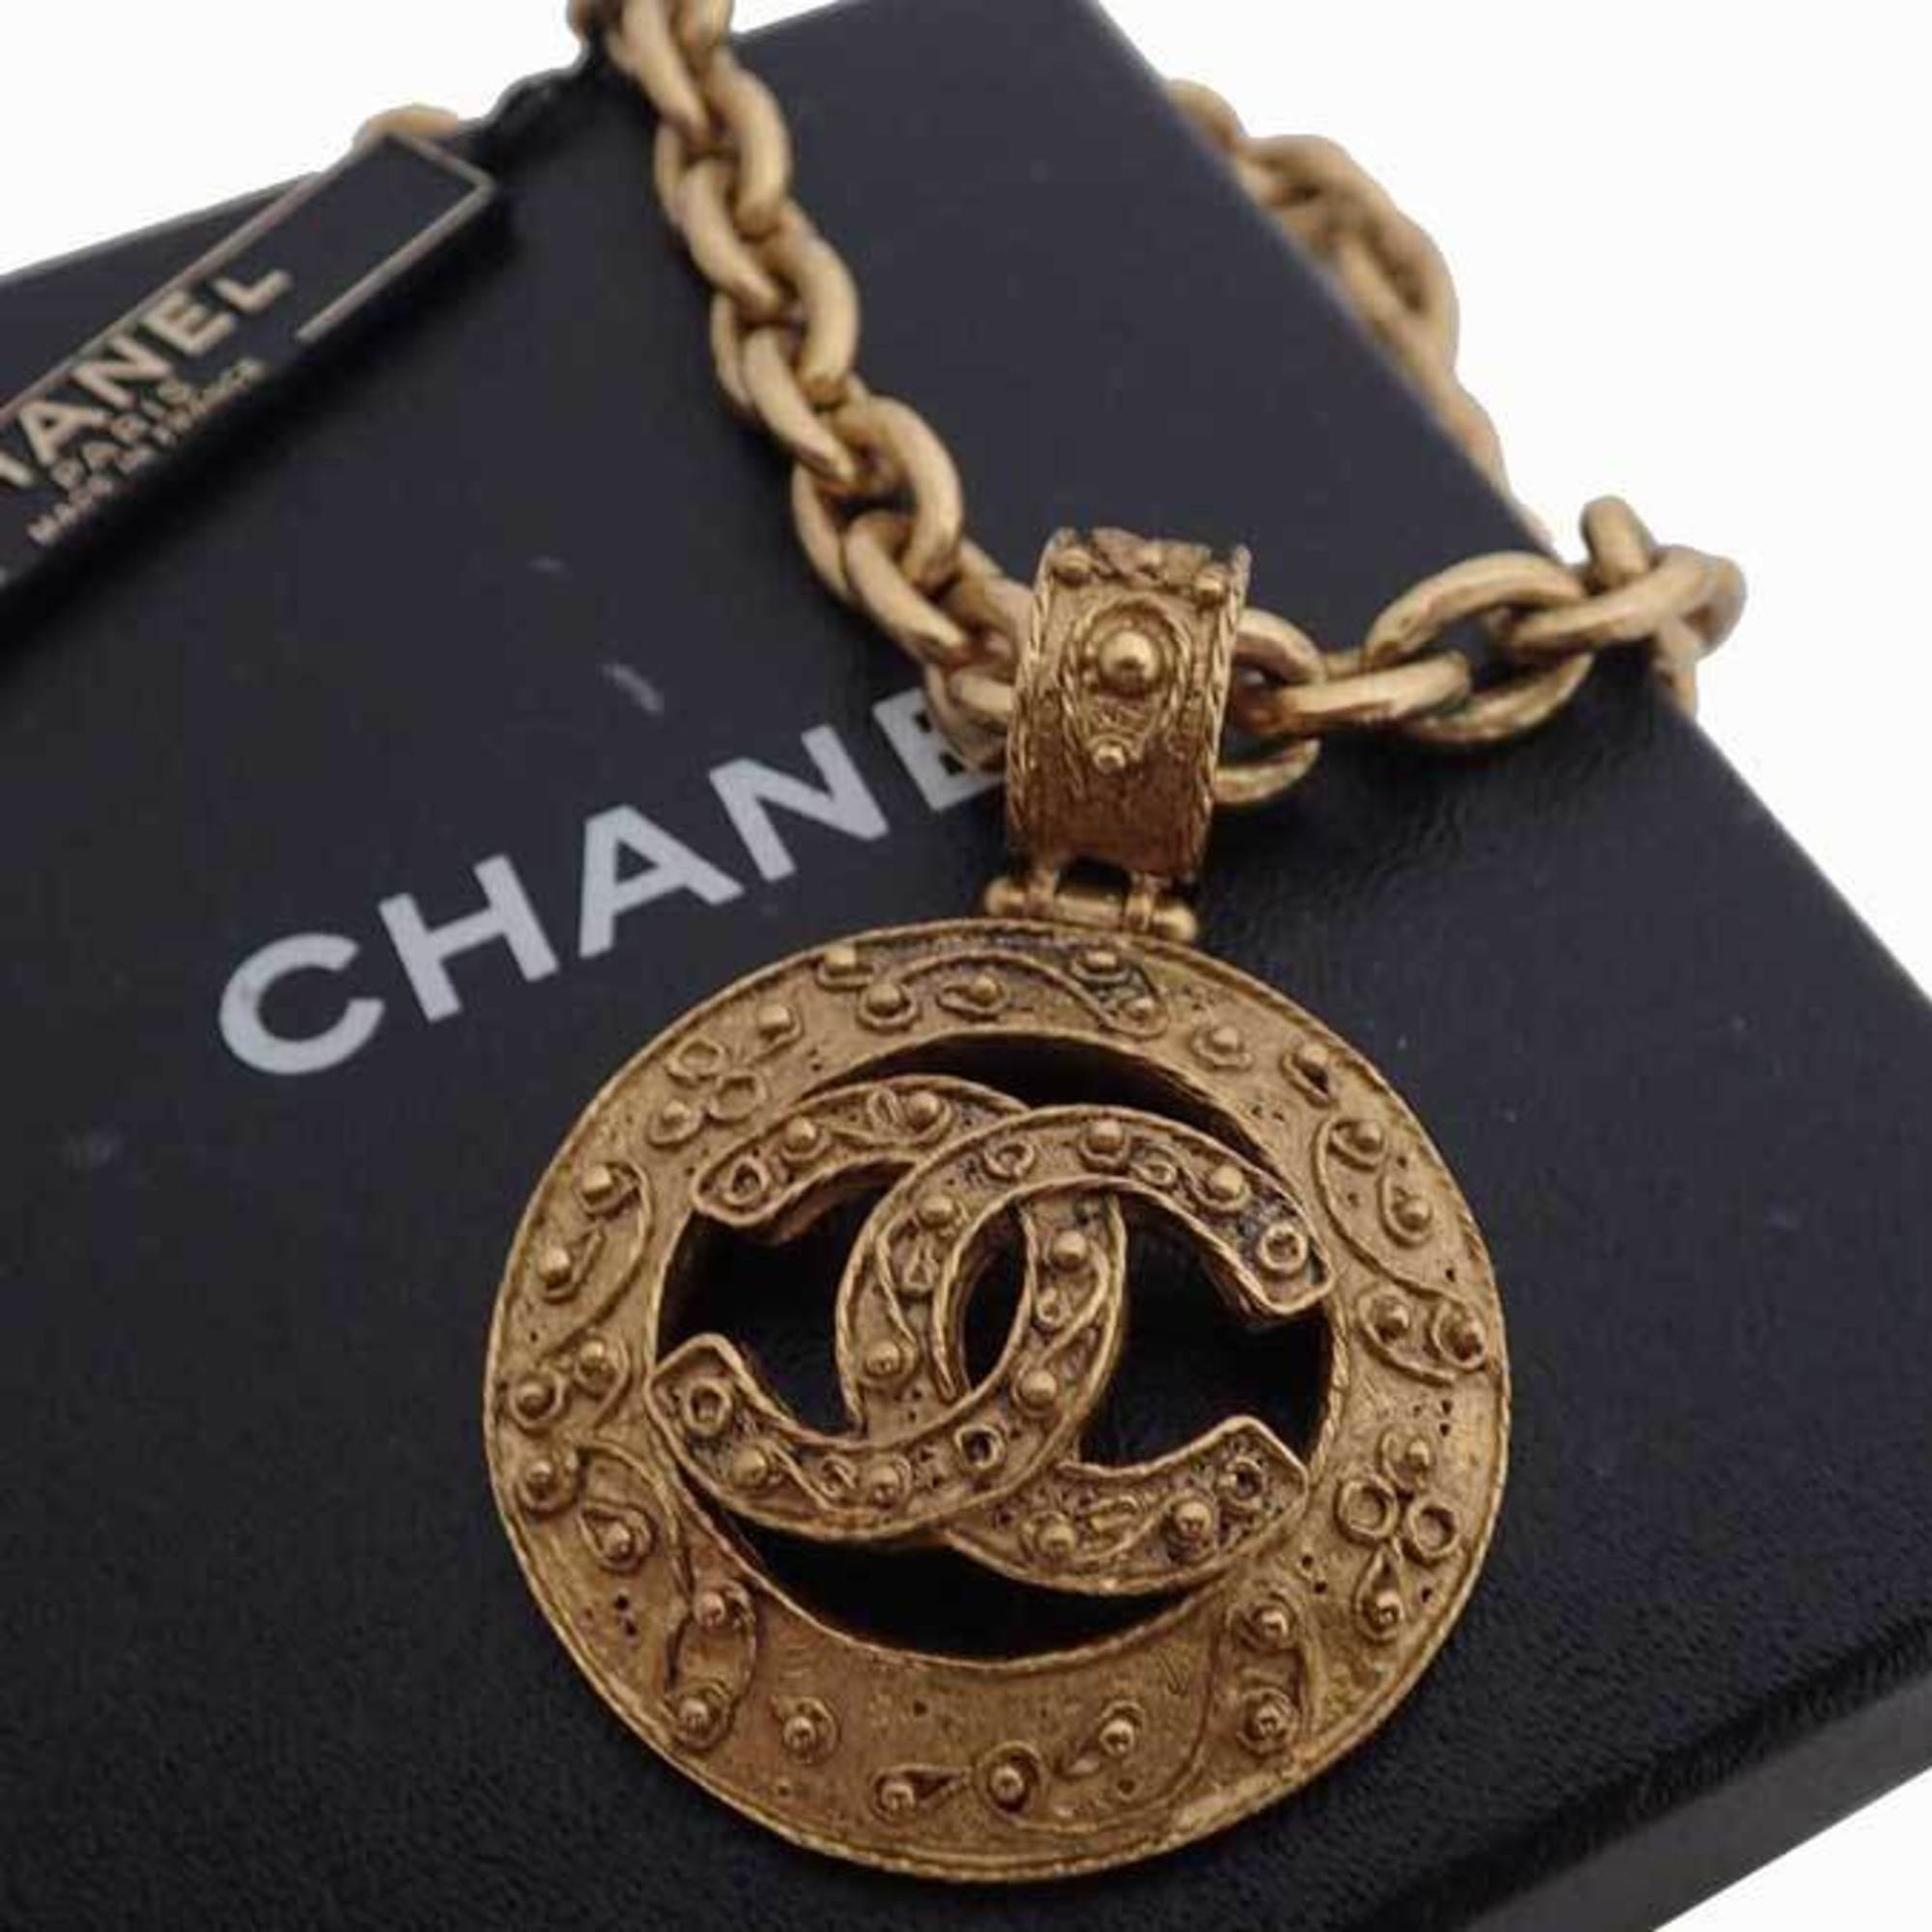 Chanel CHANEL necklace here mark gold pendant chain Lady's